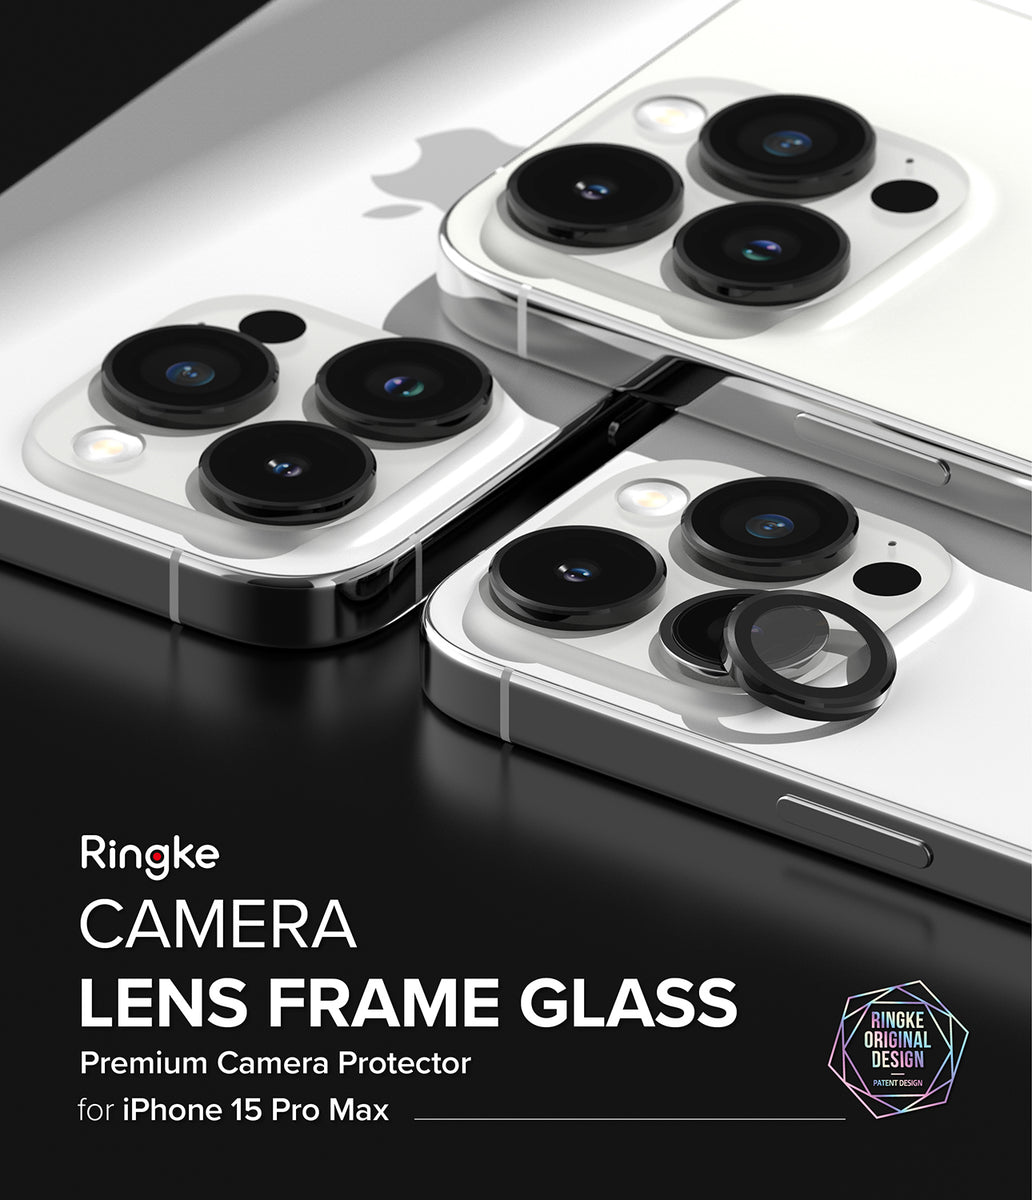 iPhone 15 Pro Max, Camera Lens Frame Glass